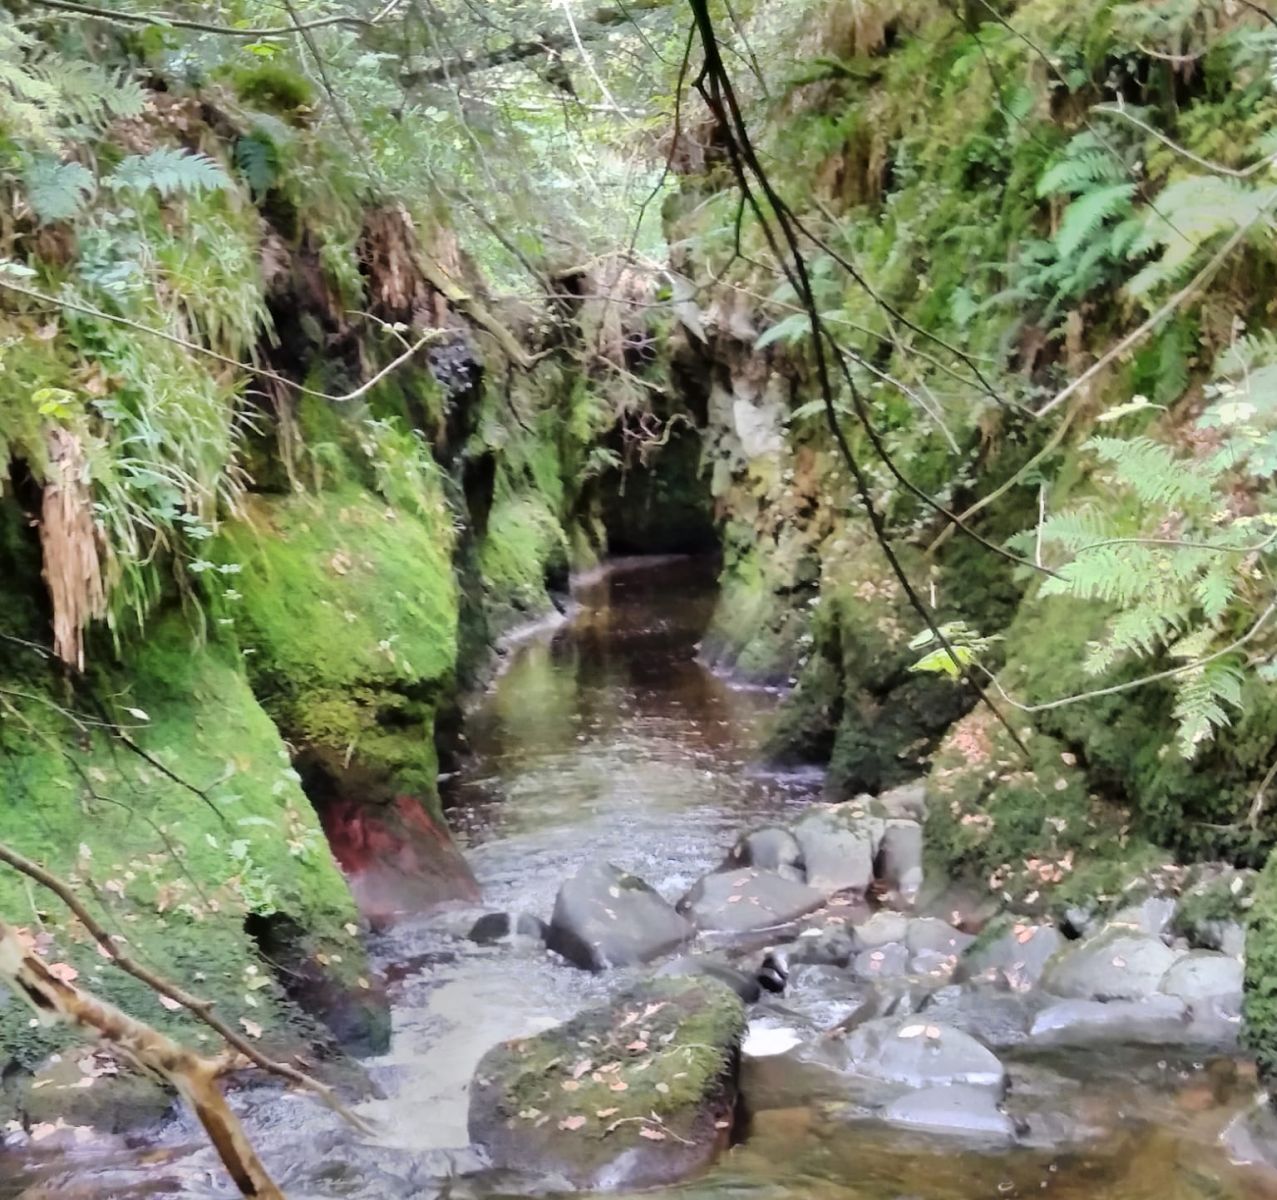 Entrance to the "Whale's Belly"  in the gorge of Boquhan Burn